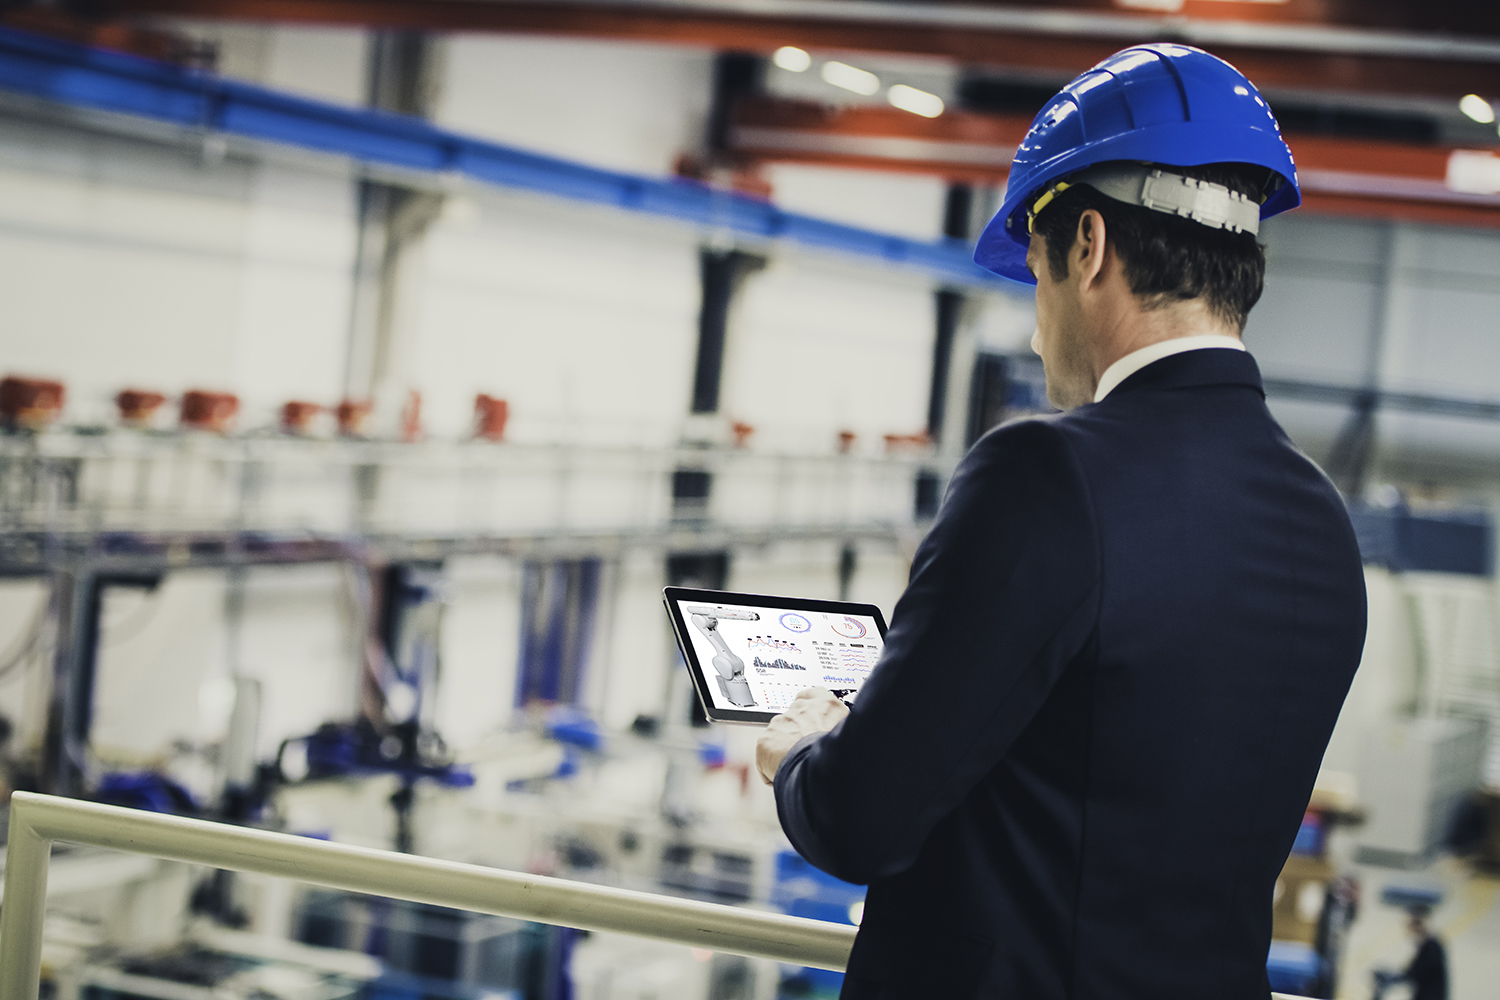 The latest digital manufacturing trends are aimed at connecting physical and virtual factory environments to boost productivity, efficiency and profitability. [Source: Mitsubishi Electric Europe B.V.]